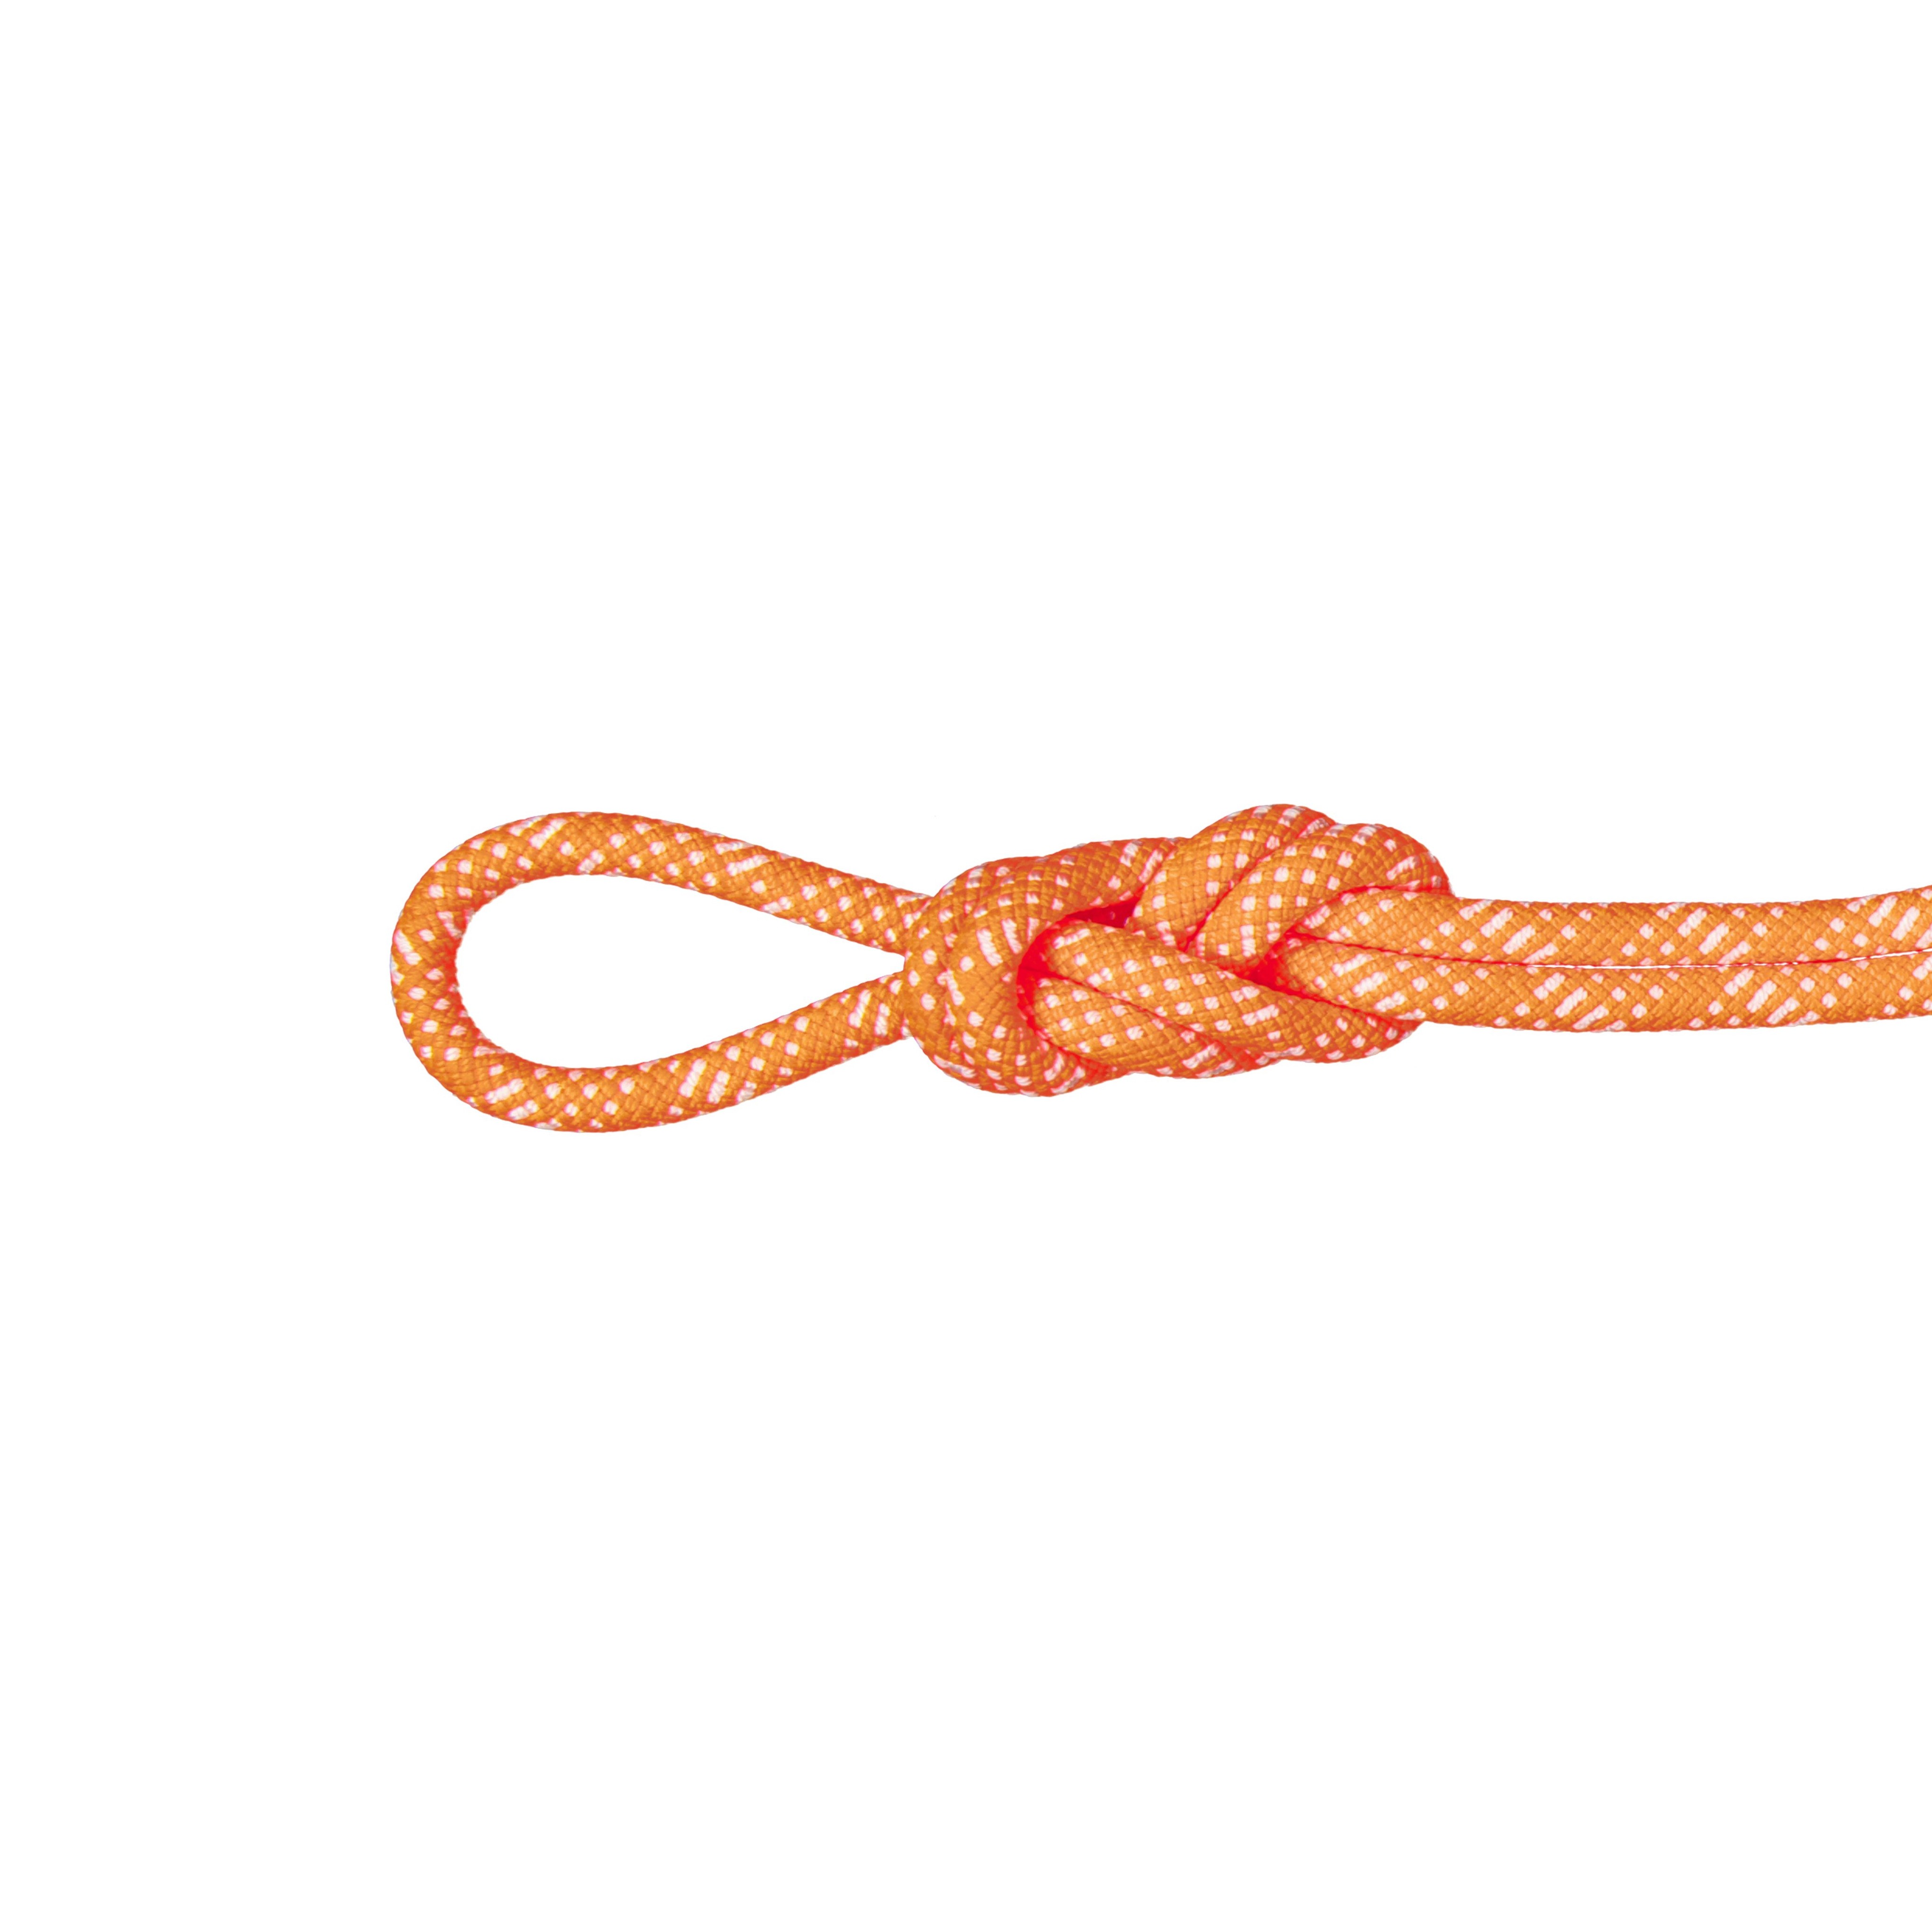 10.1 Gym Station Classic Rope - Classic Standard, safety orange-white, 200 m thumbnail